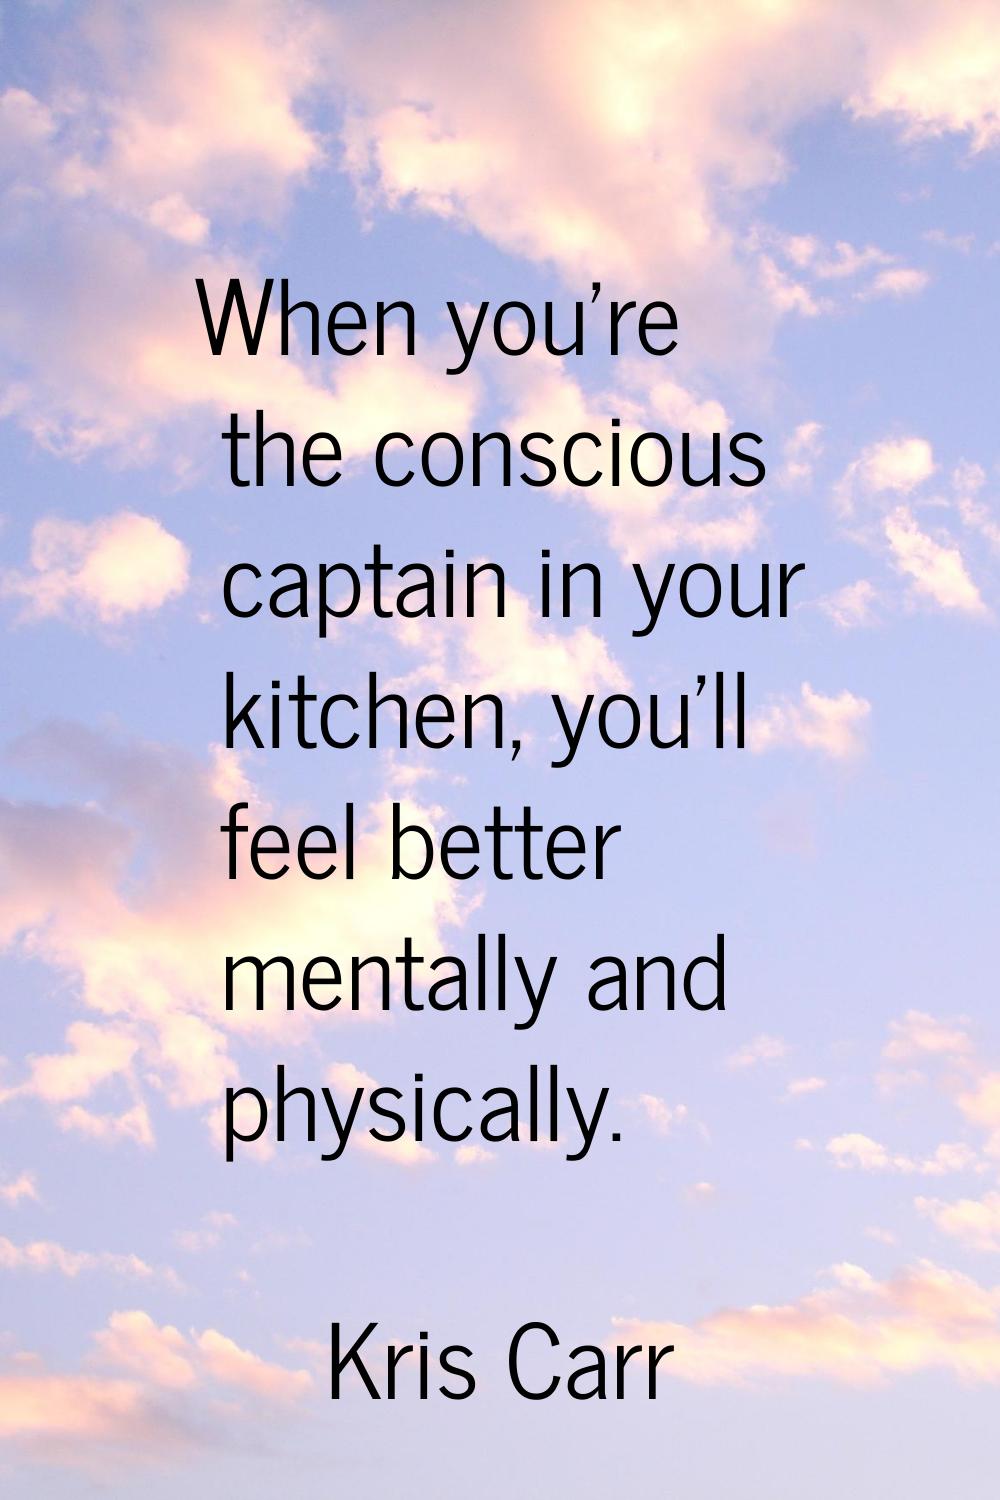 When you're the conscious captain in your kitchen, you'll feel better mentally and physically.